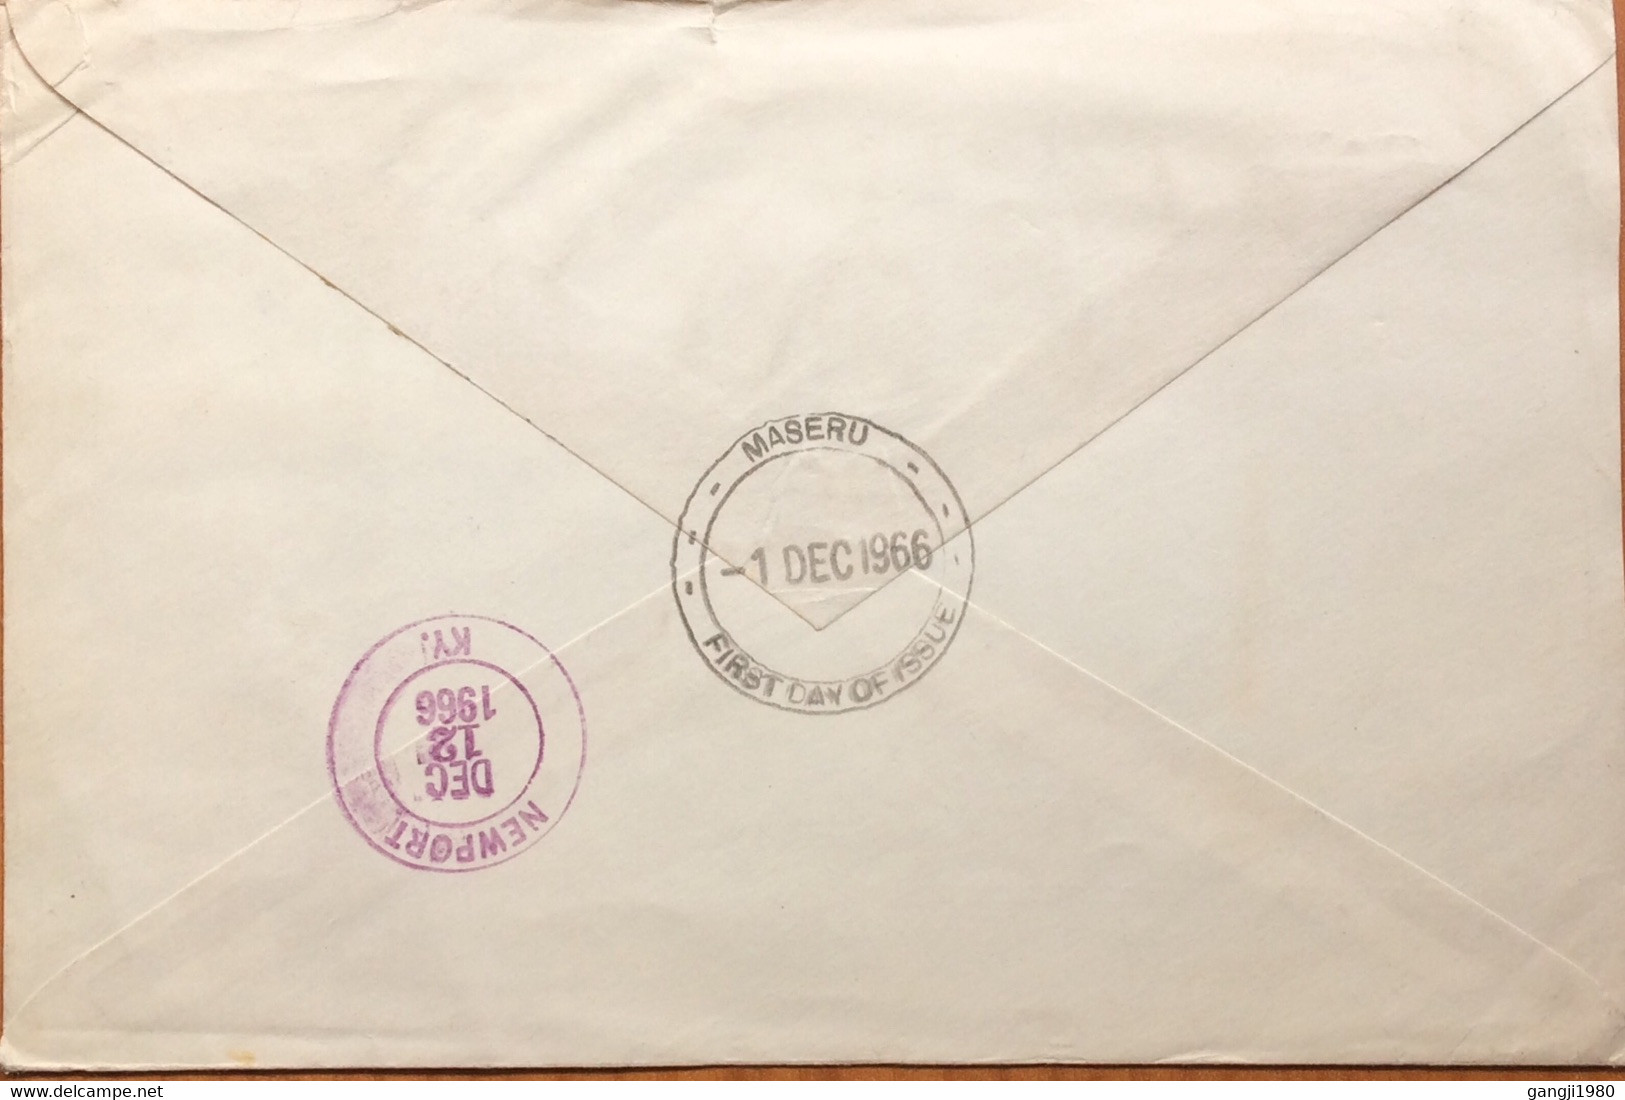 LESOTHO 1966, REGISTER COVER  USED, UNESCO, EDUCATION, CULTURE & SCIENCE, SET OF 4 STAMP, MASERU CITY CANCEL - Lesotho (1966-...)